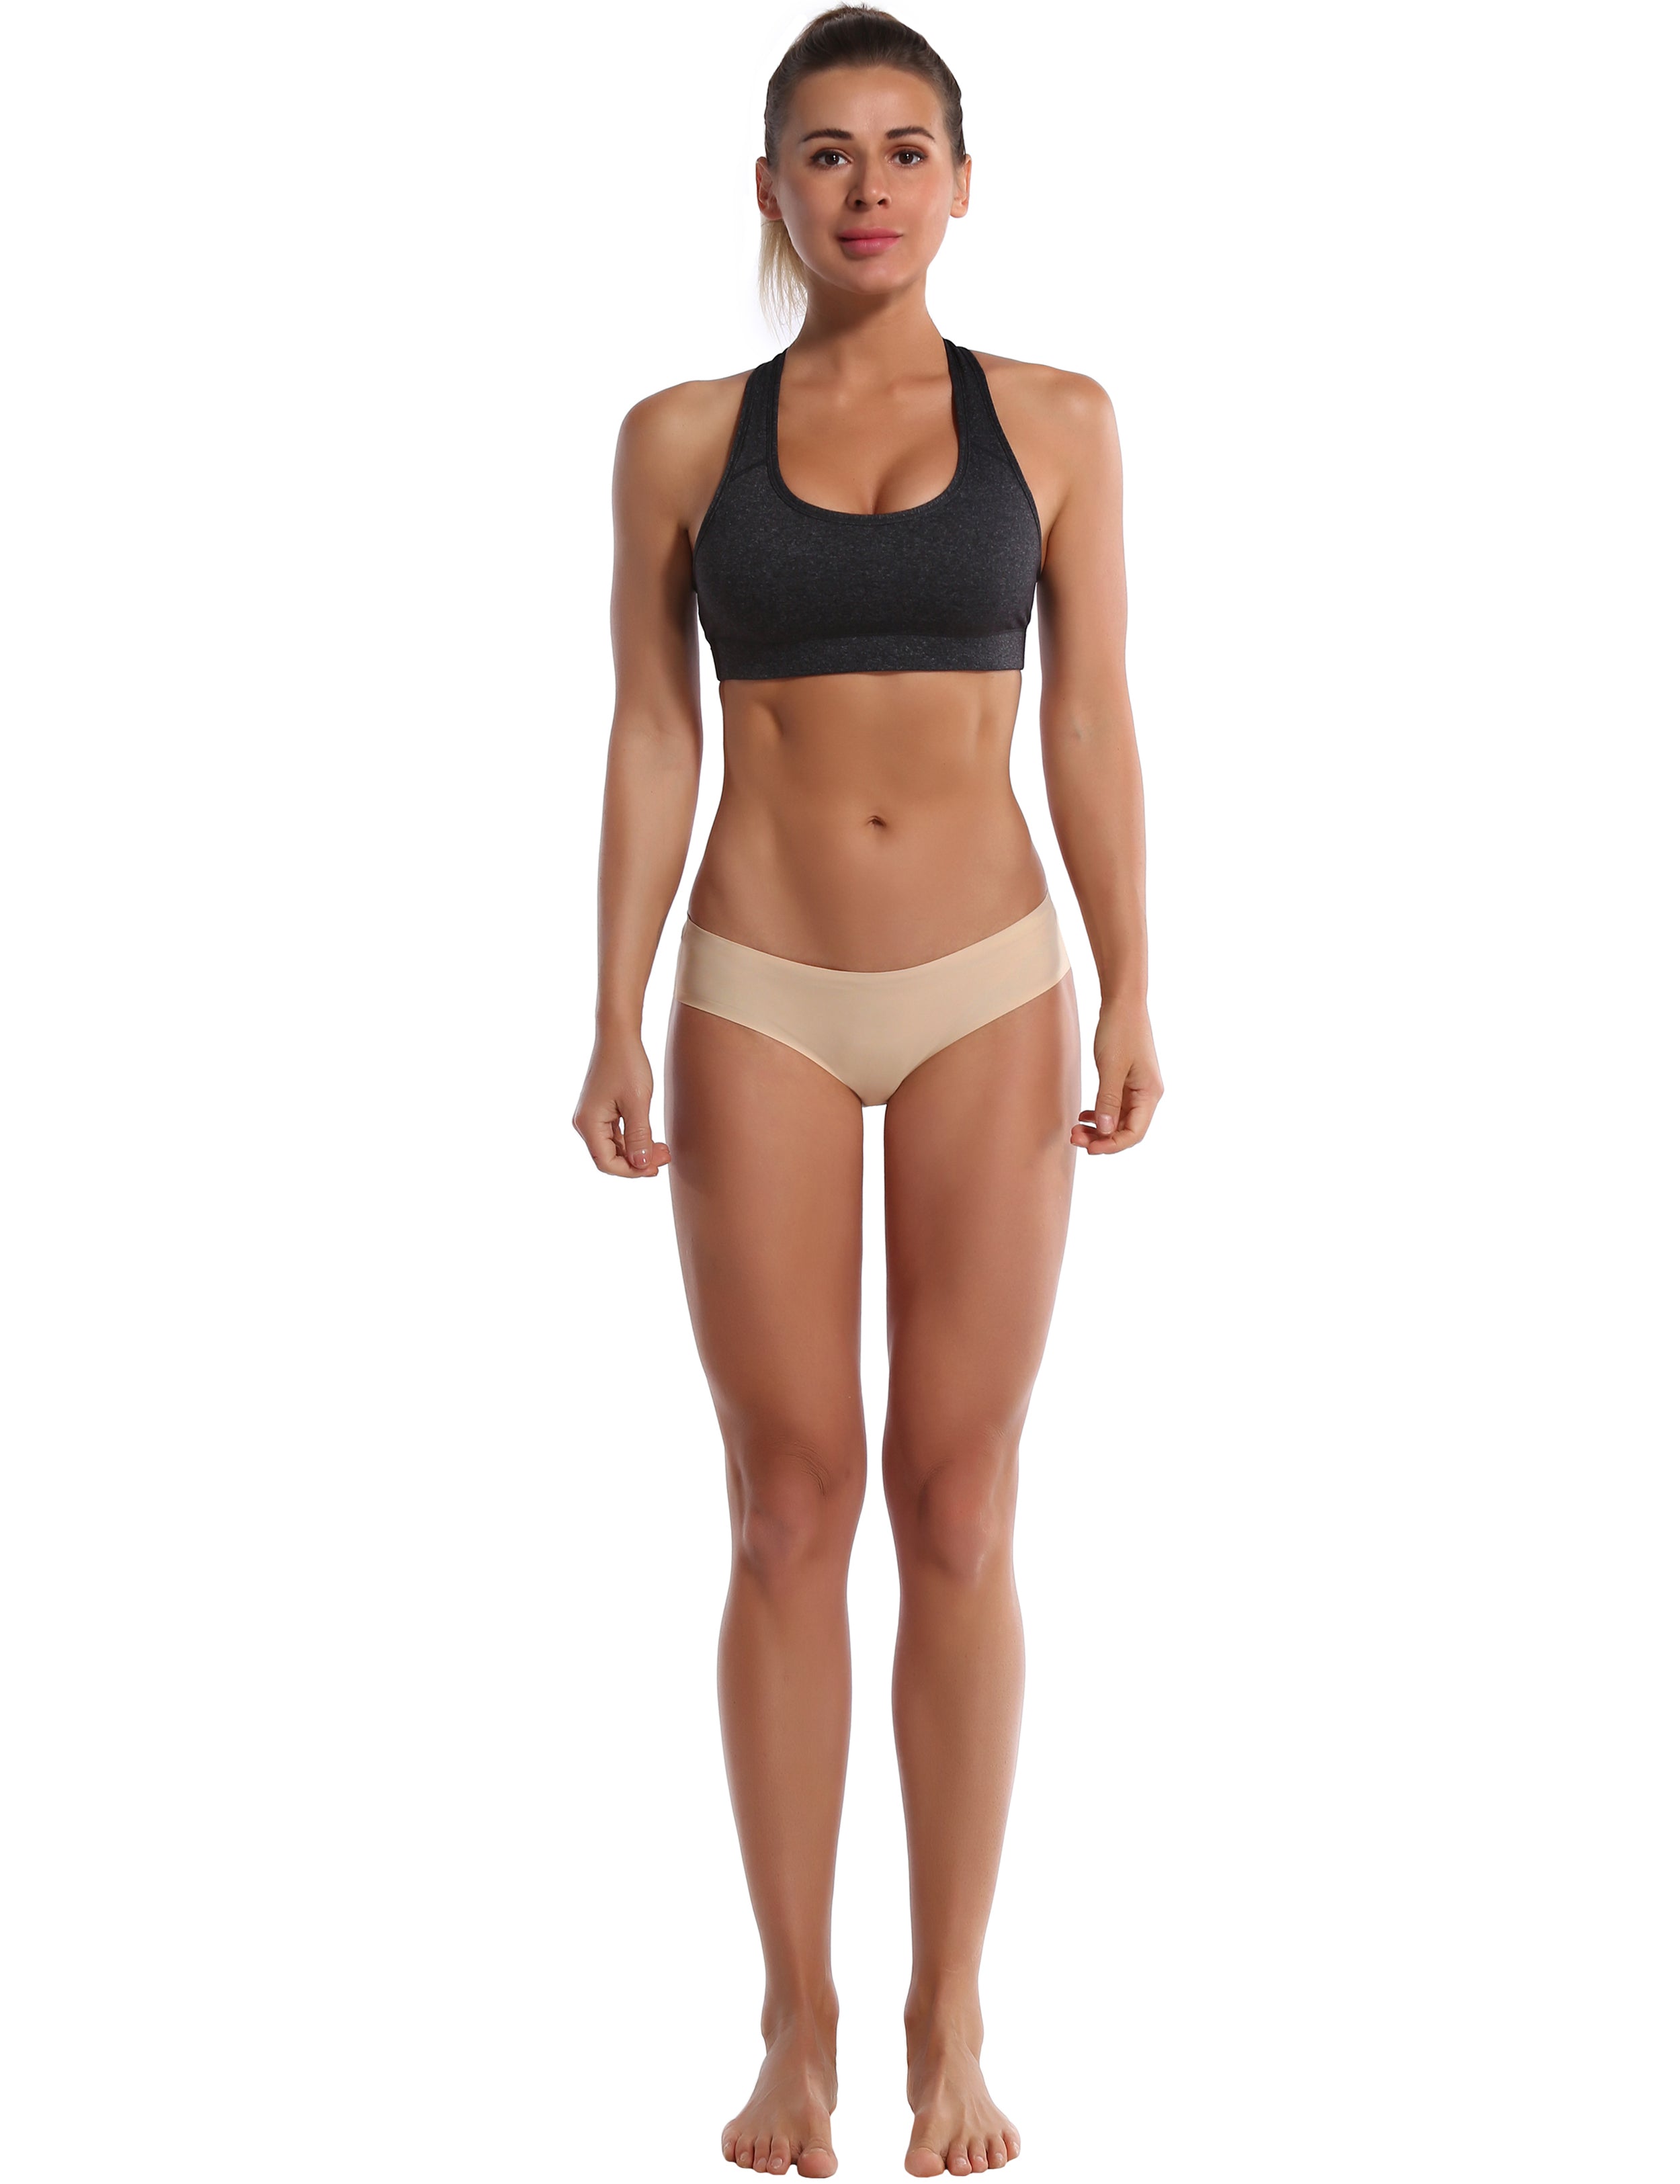 Invisibles Sport Bikini Panties skin Sleek, soft, smooth and totally comfortable: our newest bikini style is here. High elasticity High density Softest-ever fabric Laser cutting Unsealed Comfortable No panty lines Machine wash 95% Nylon, 5% Spandex